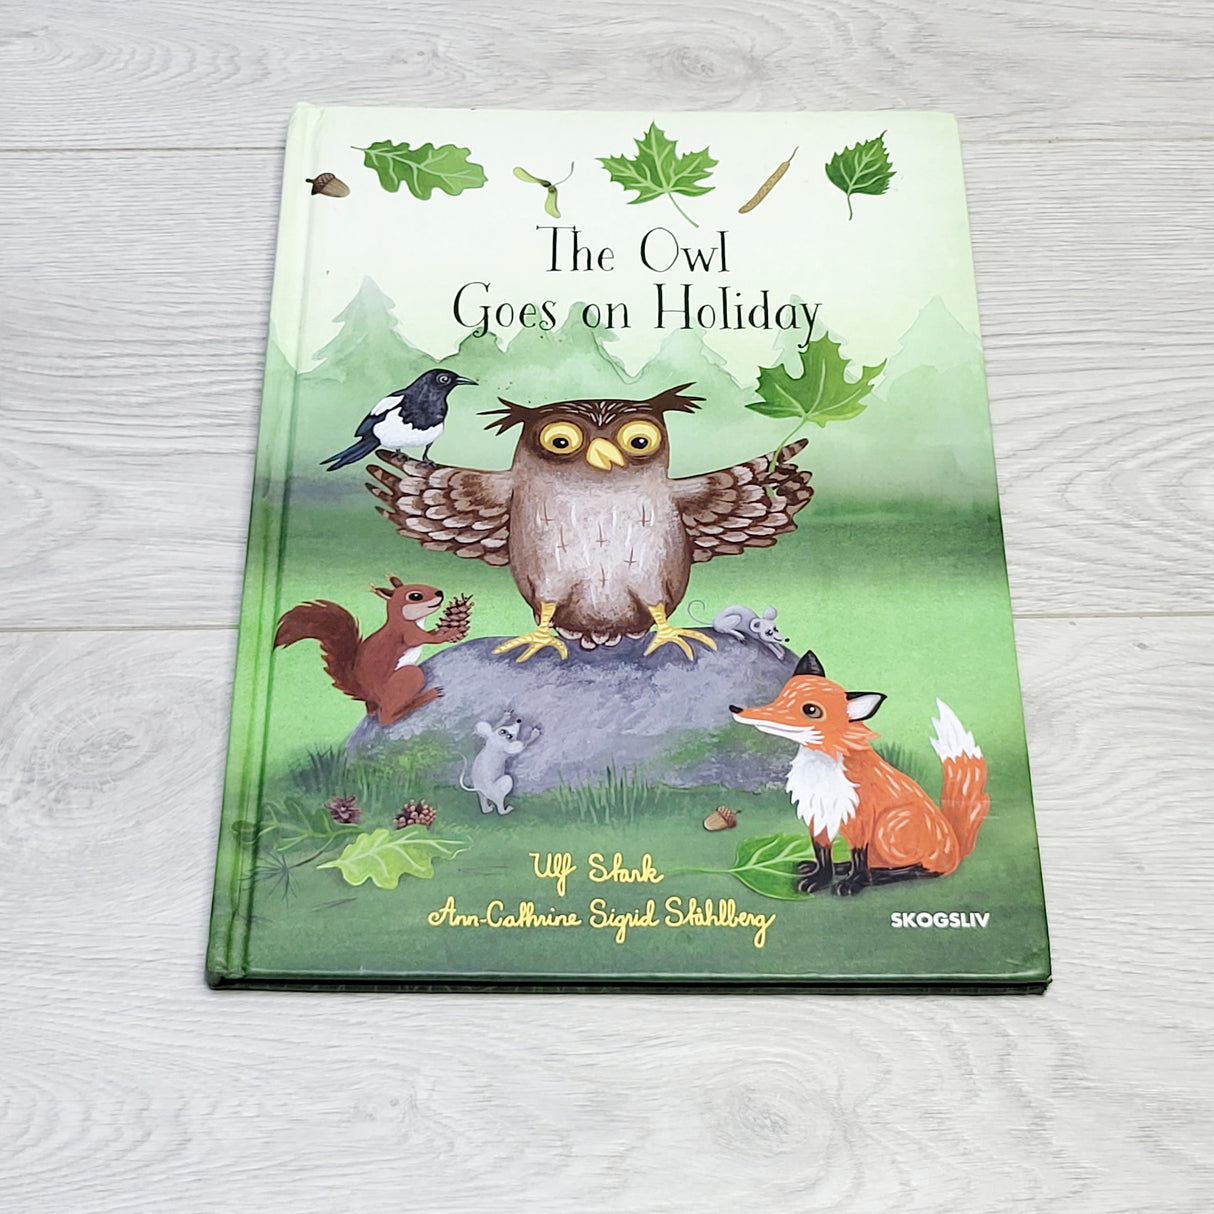 MSNDS2 - The Owl Goes on Holiday. Hardcover book